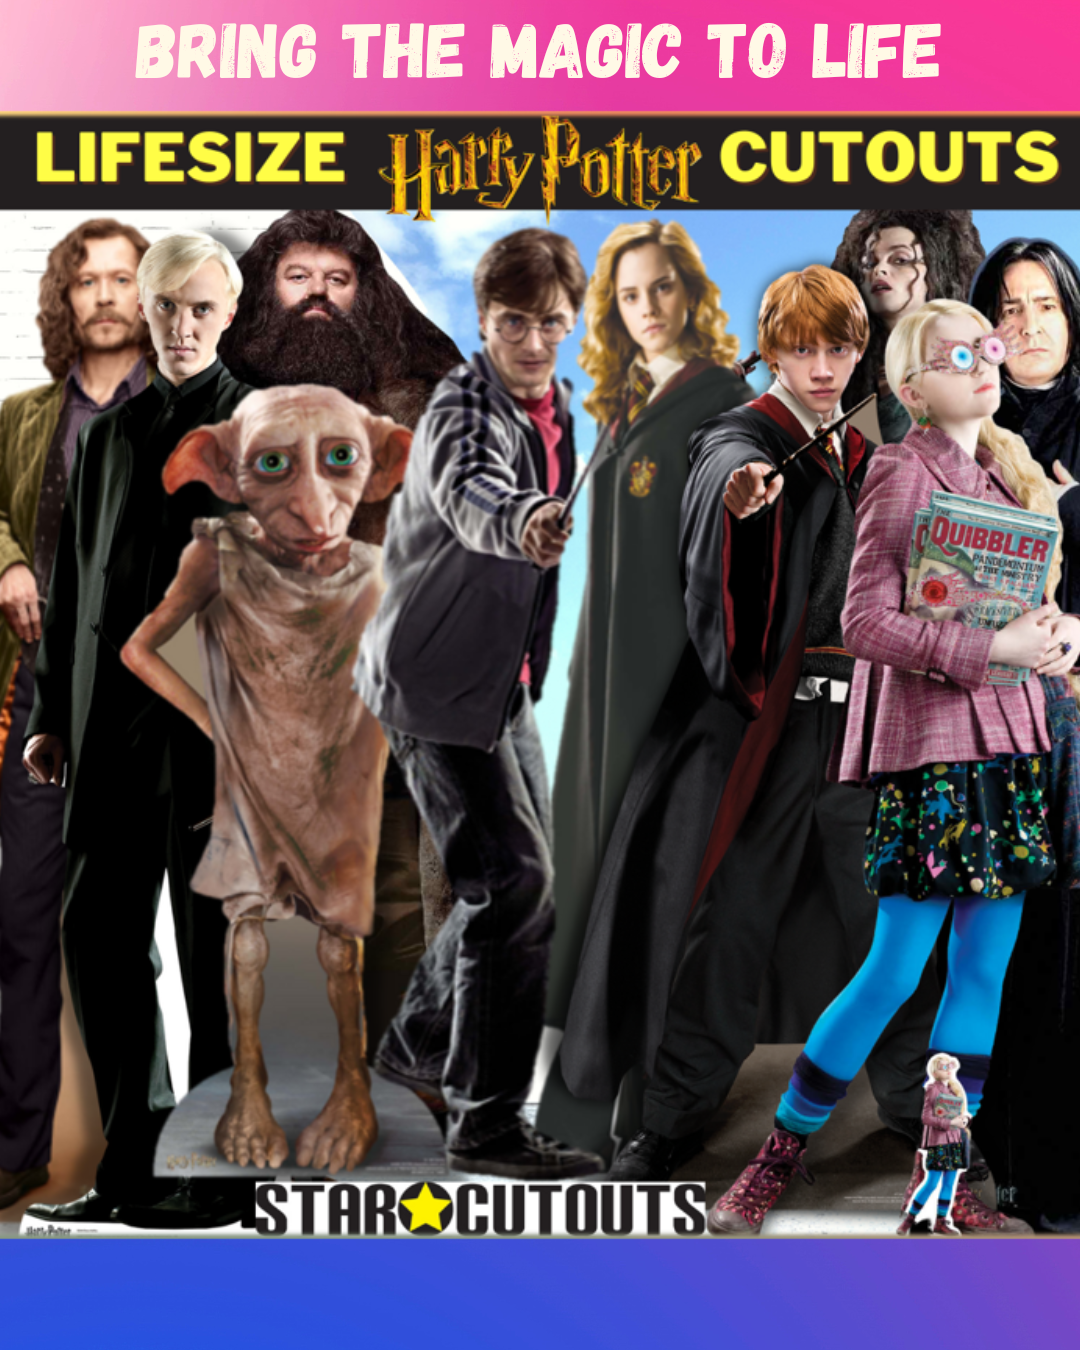 Harry Potter Hogwarts School of Witchcraft and Wizardry Uniform Cardboard Cutout Lifesize